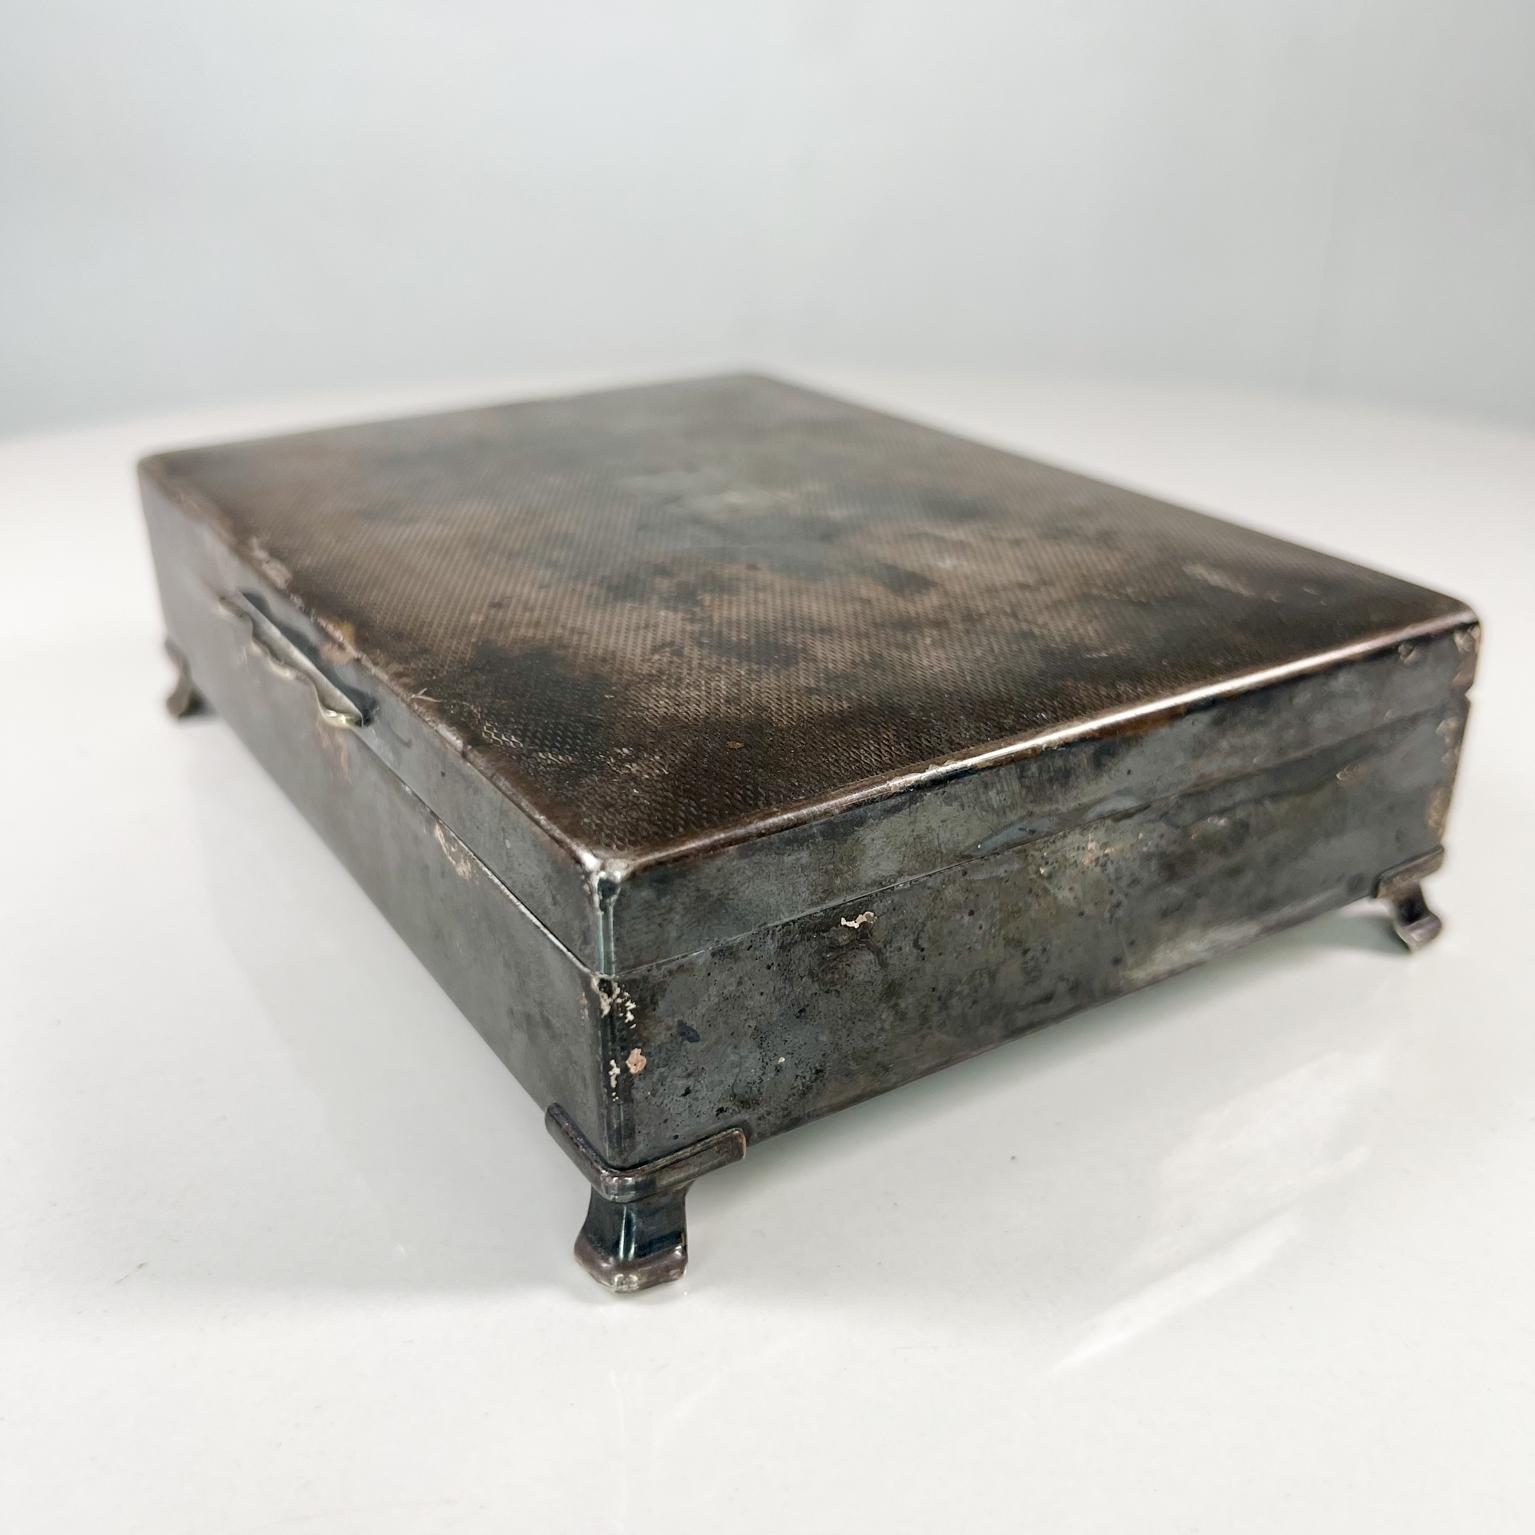 1950s England Fancy Aristocrat vintage silverplate keepsake box
Measures: 2 tall x 4.88 dwepth x 6.63 width
Wood lined
Maker stamped made in England Aristocrat H.E.P.N.S.B
Preowned unrestored fair vintage condition
Review all images.
 